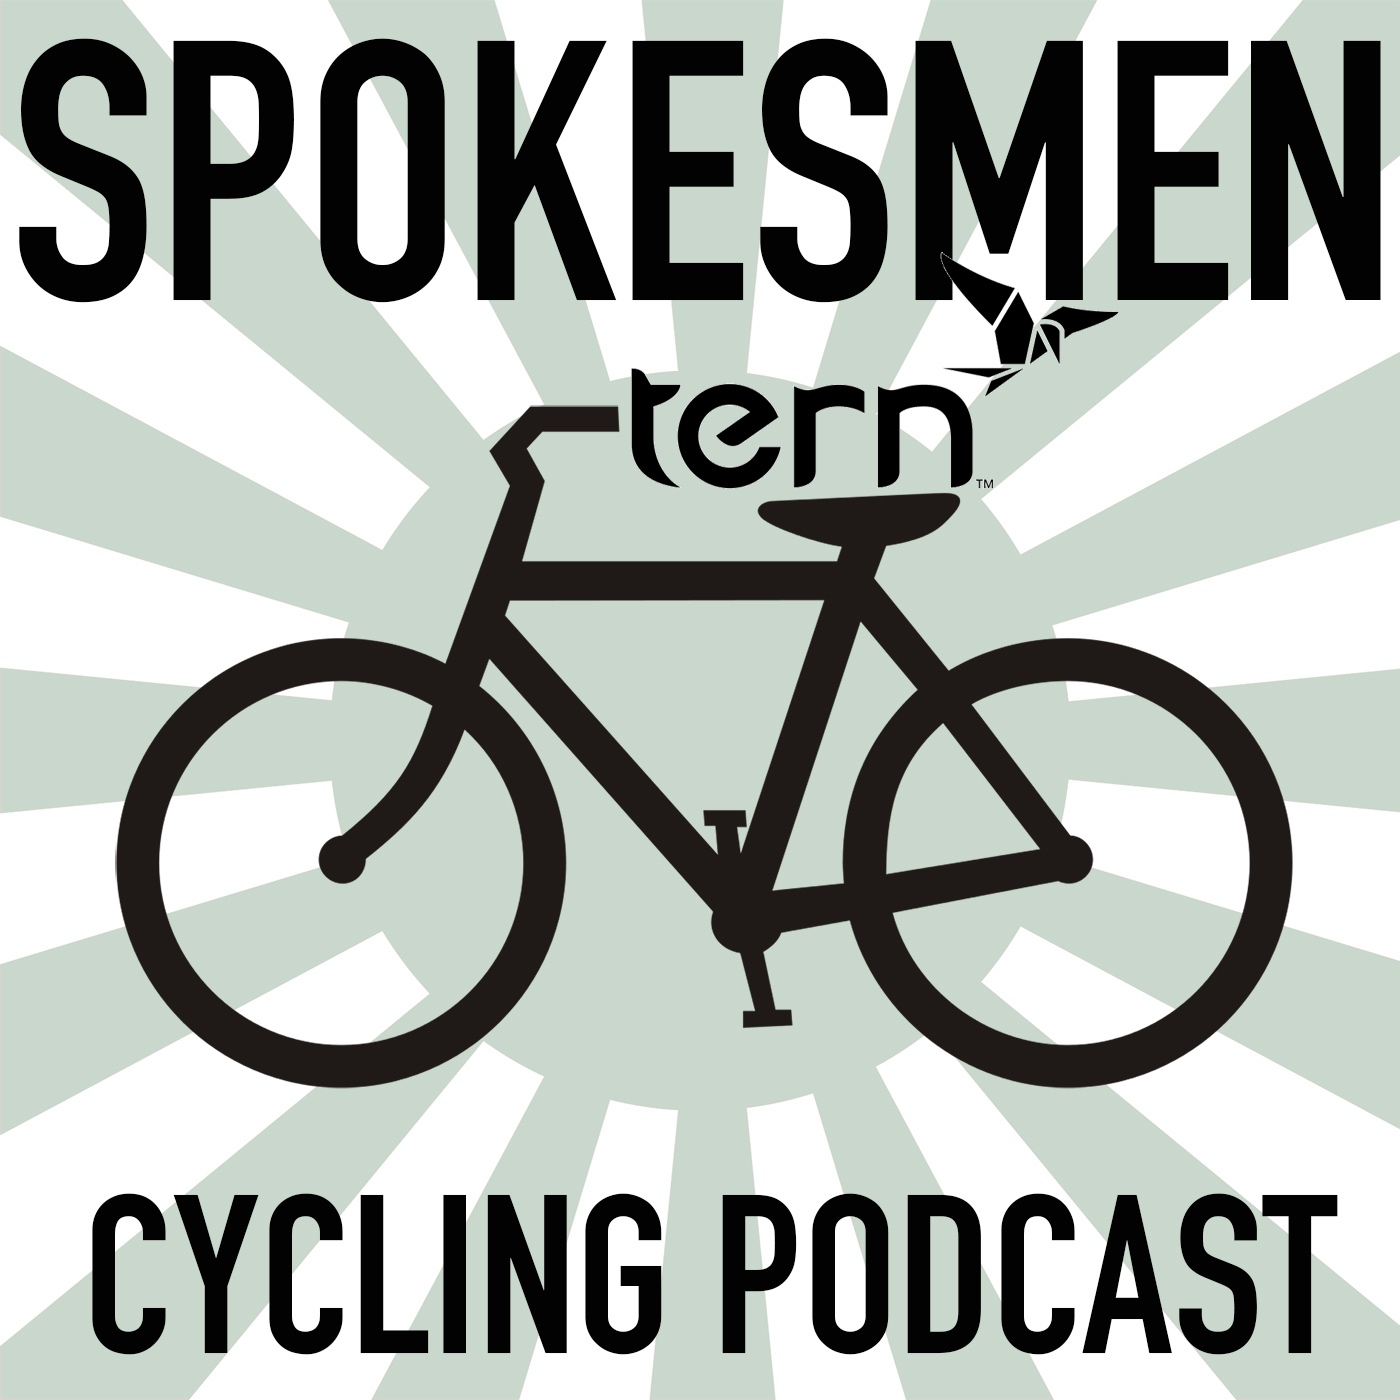 EPISODE 344: Computer Modelling of How Cyclists (And Motorists) Hit Potholes